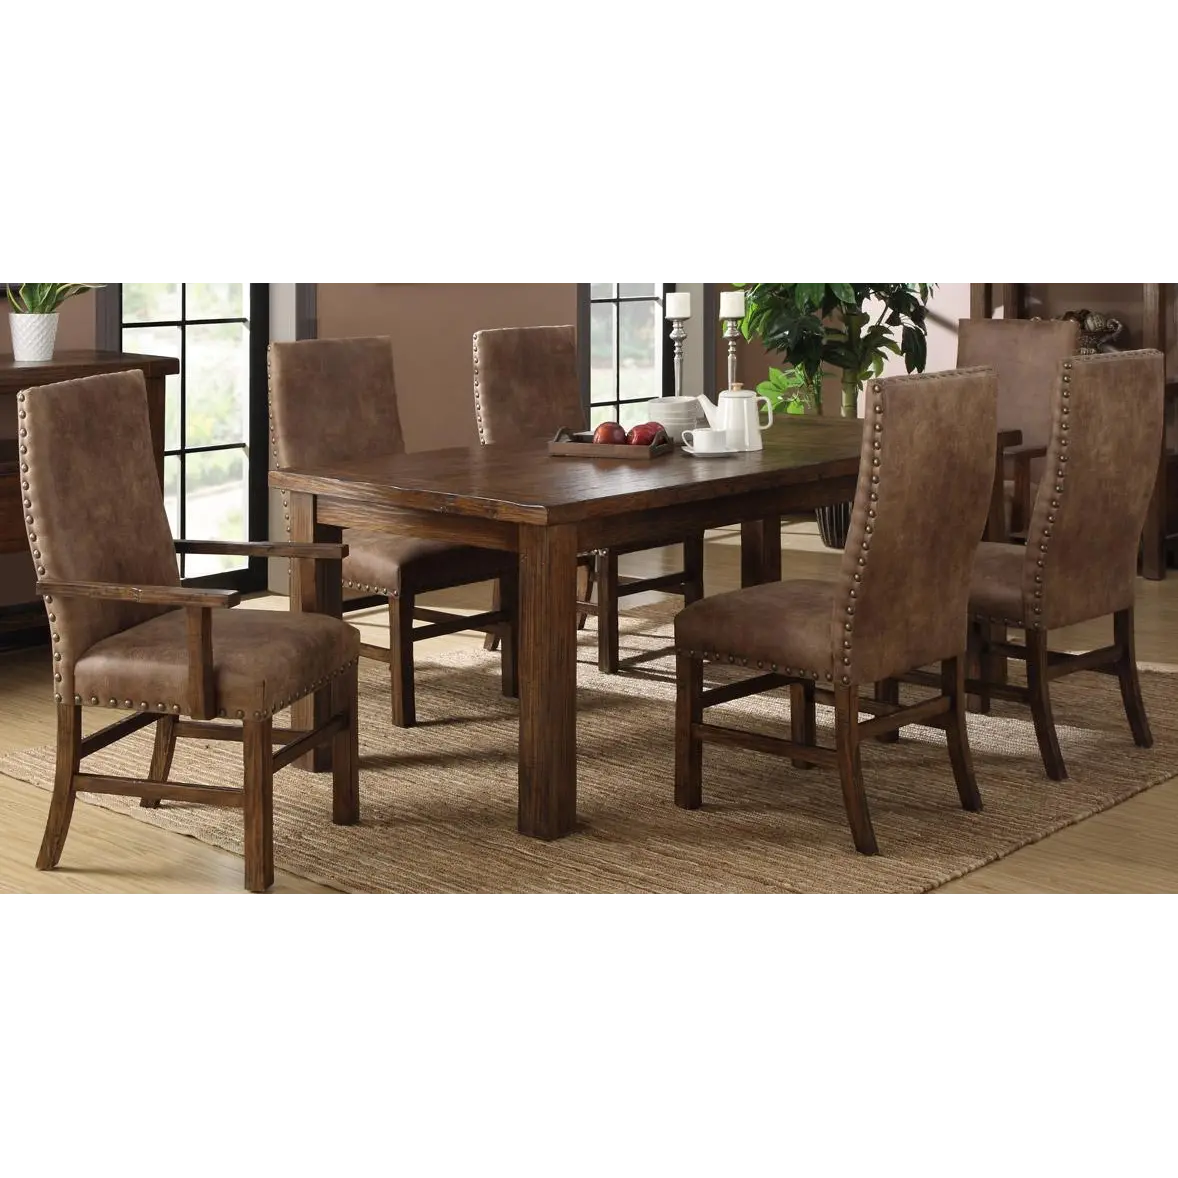 Chambers Creek Brown 5 Piece Dining Room Set with Upholstered Chairs-1